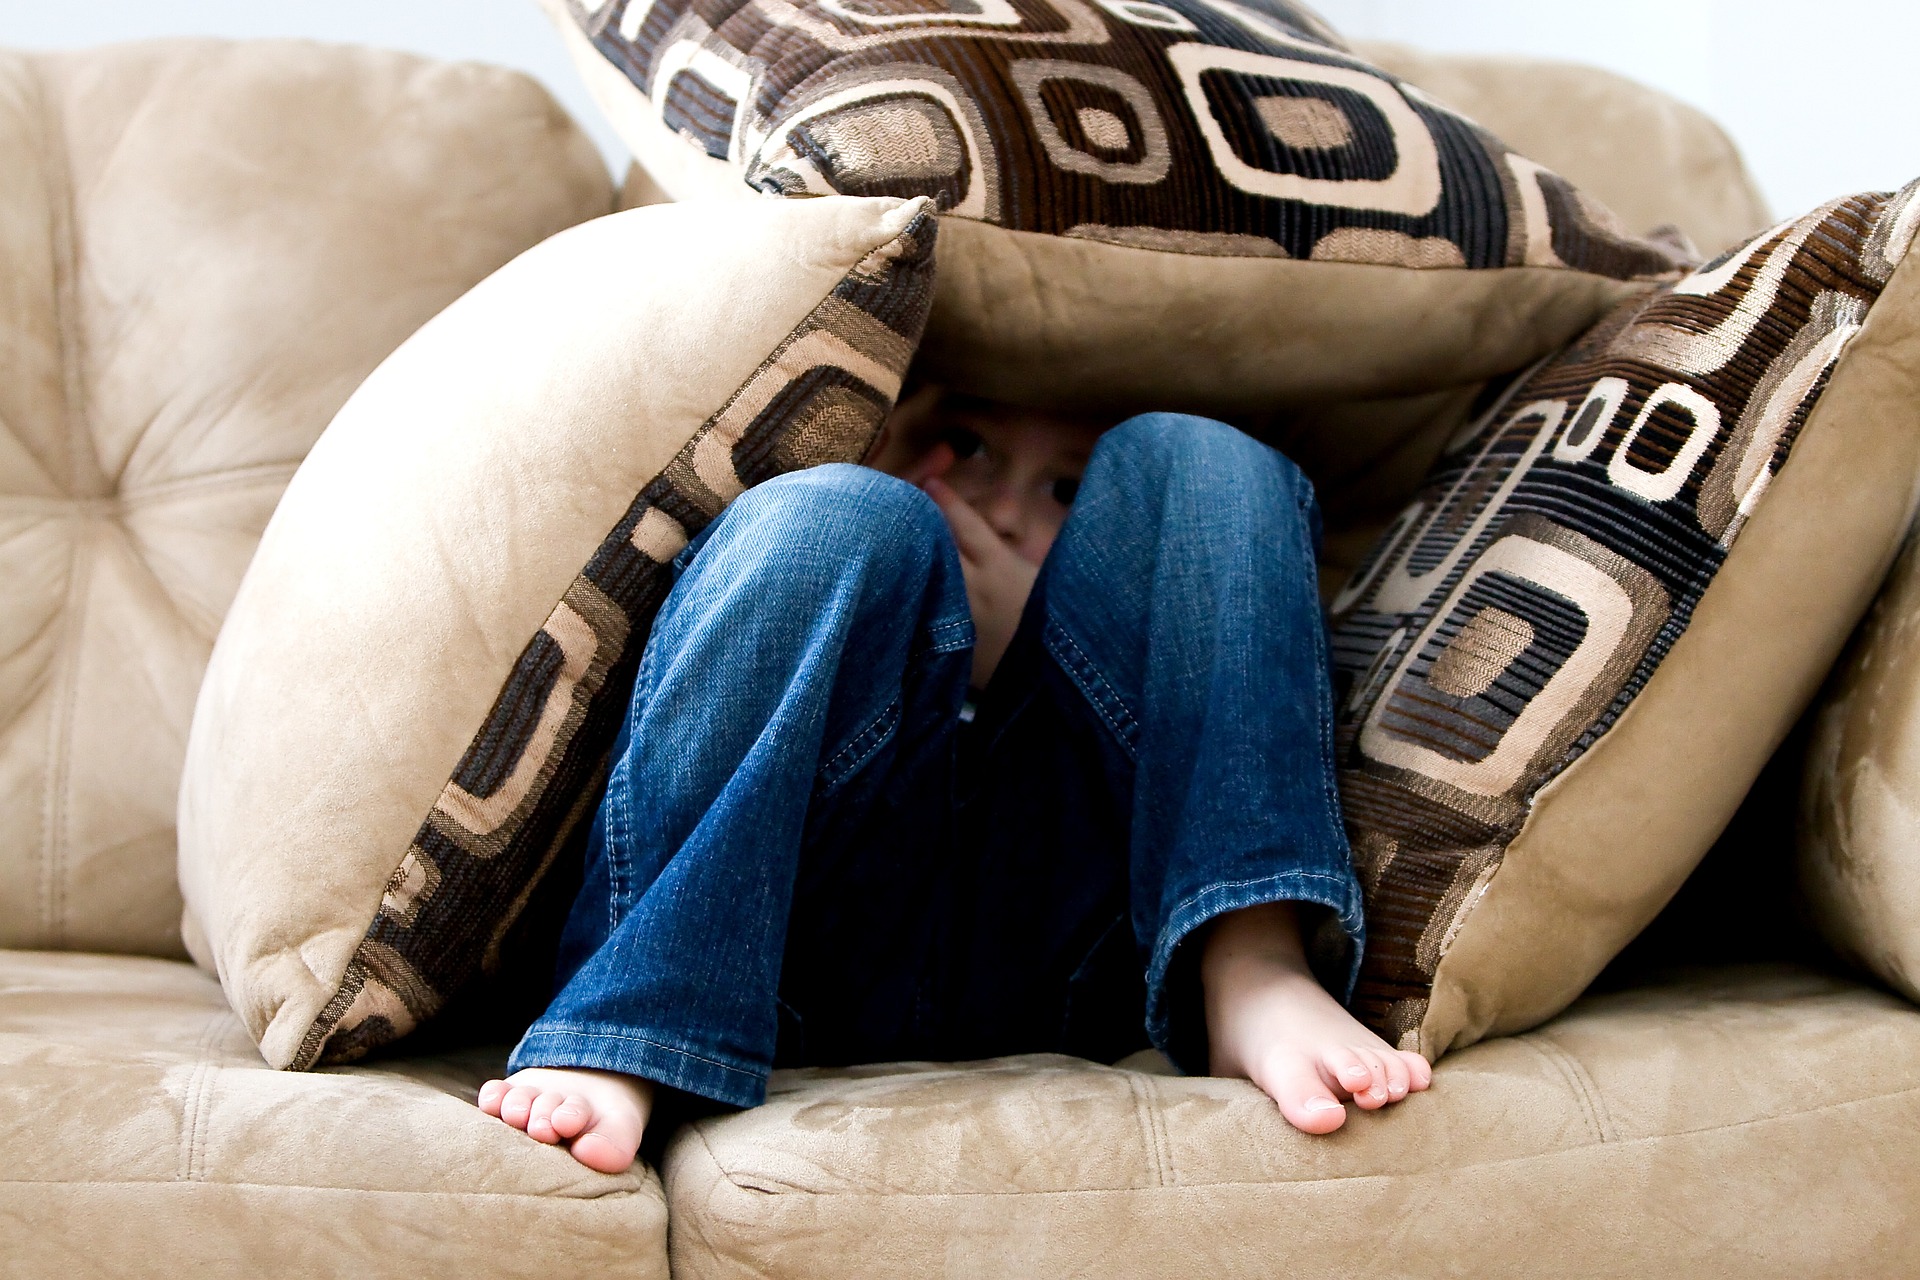 A child sitting in a sofa, surrounded by pillows, legs pulled up, face hardly showing.